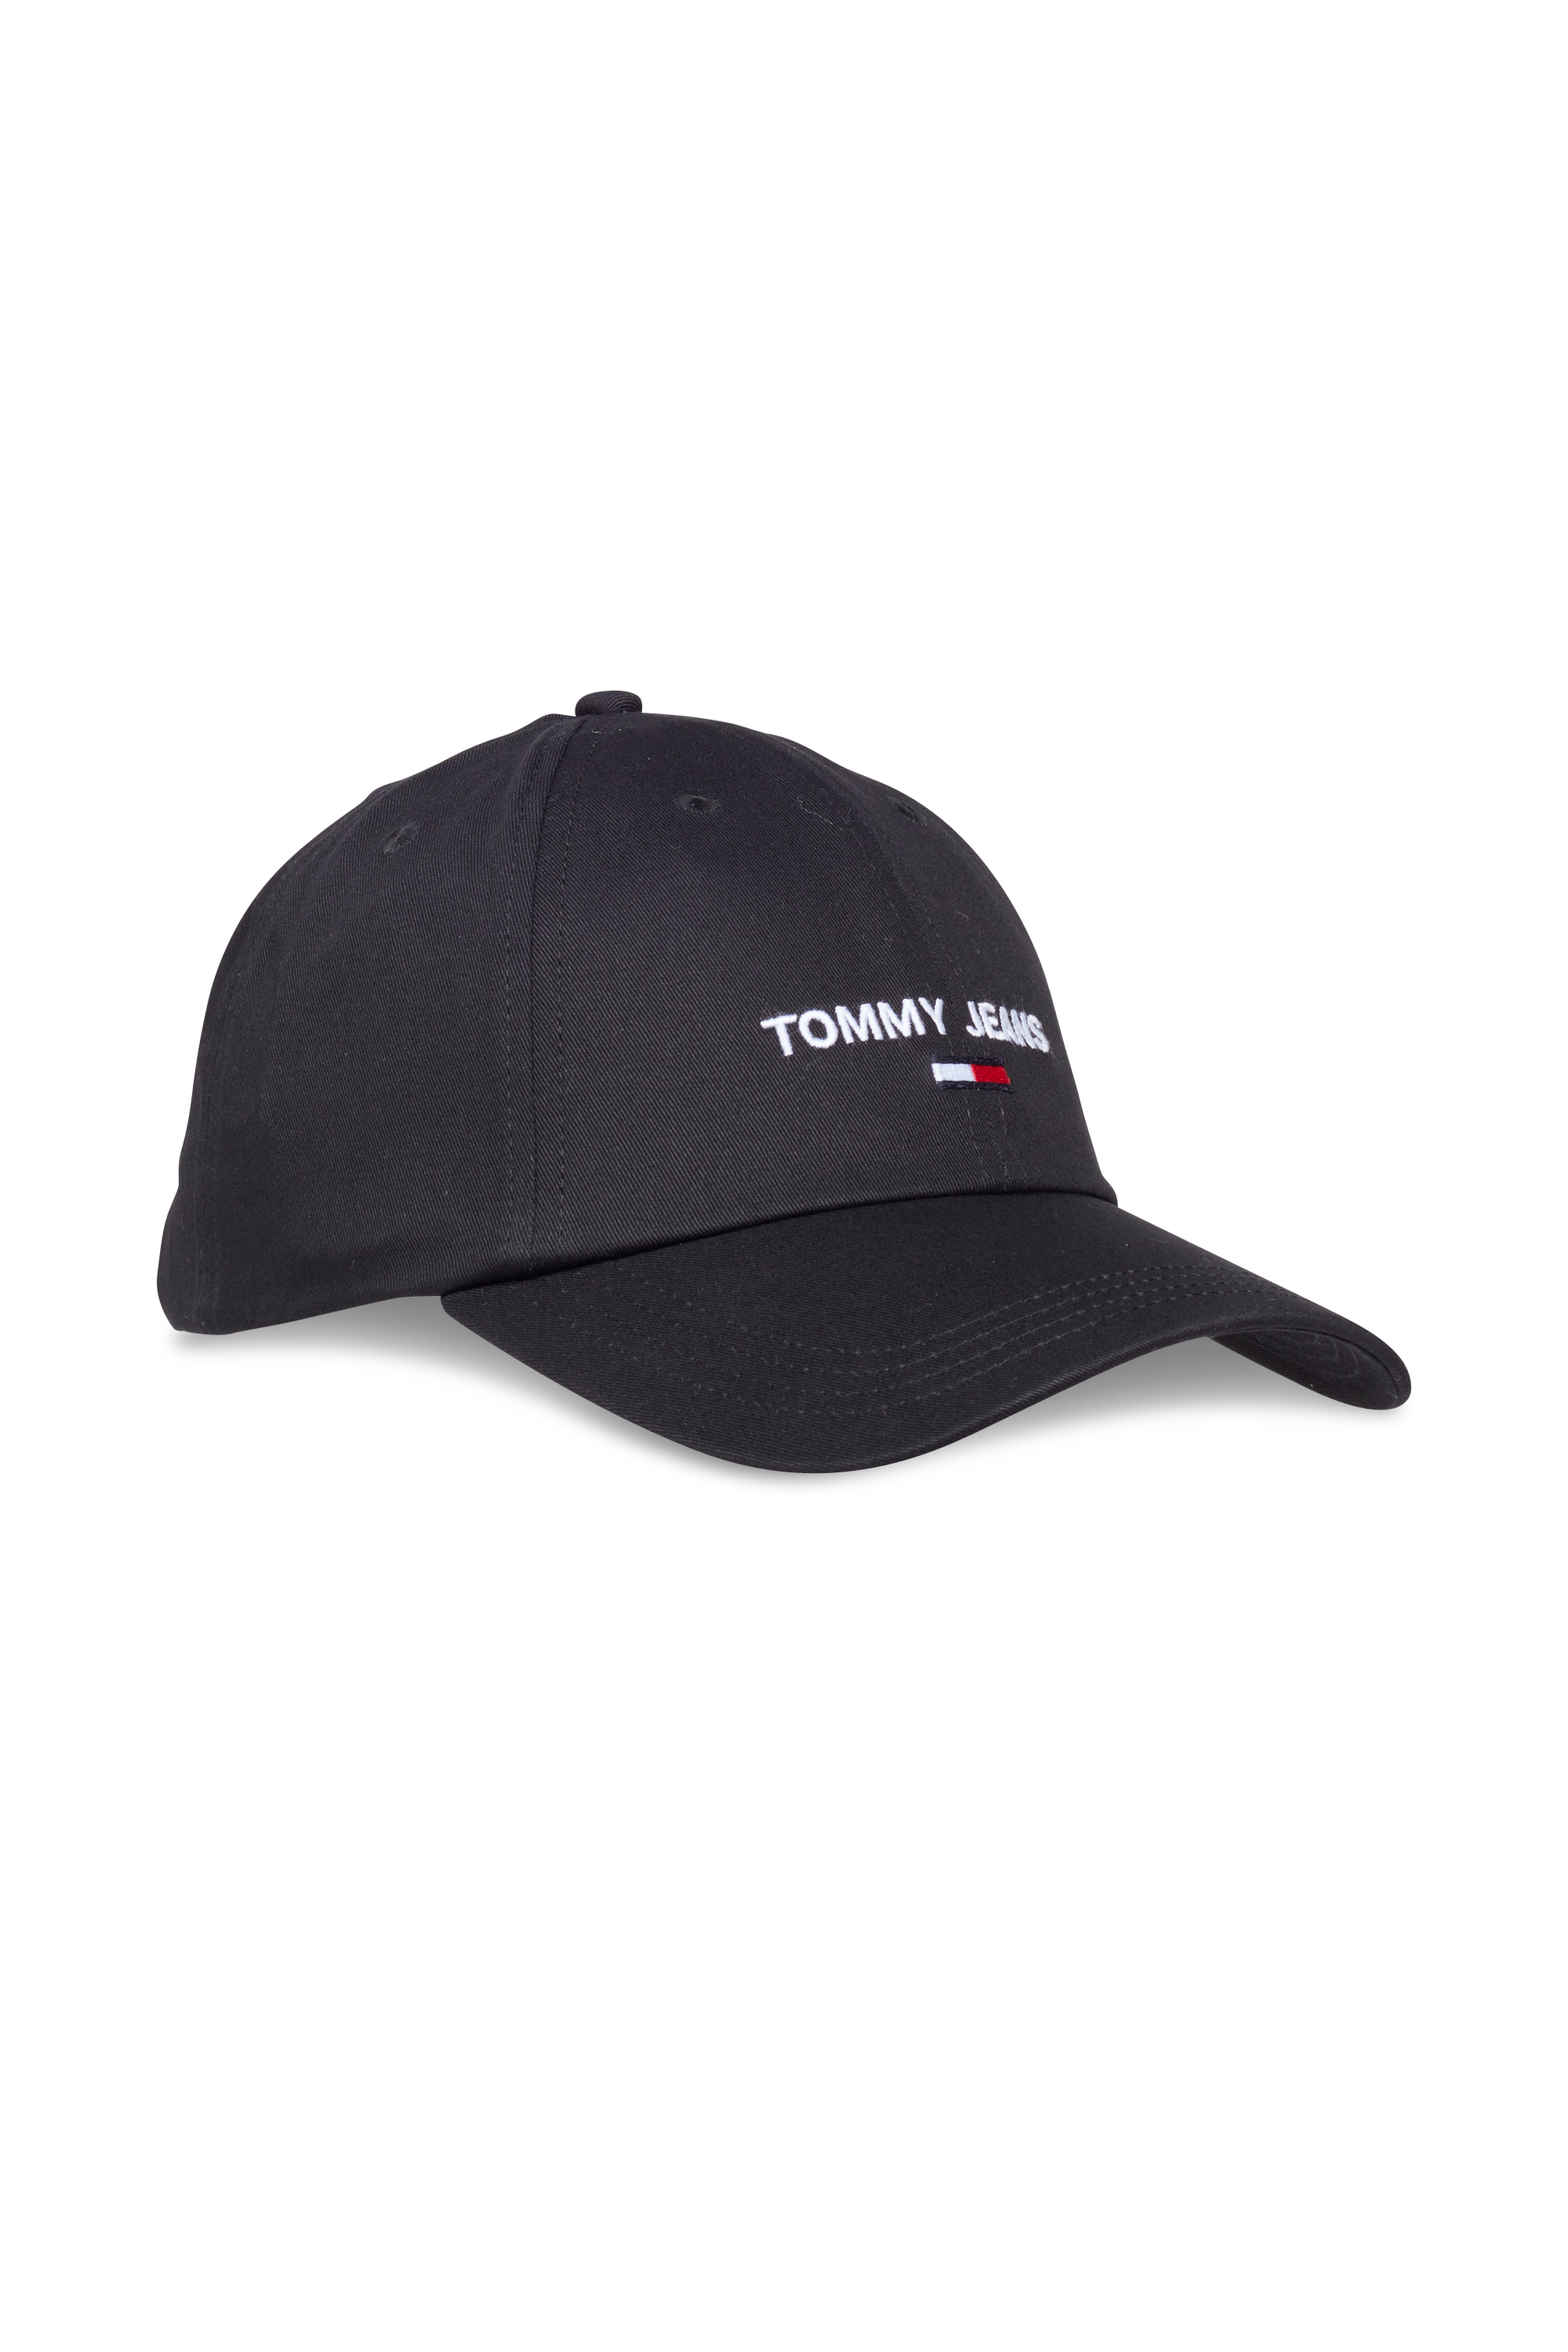 Tommy Hilfiger - Casquette - Taille TU